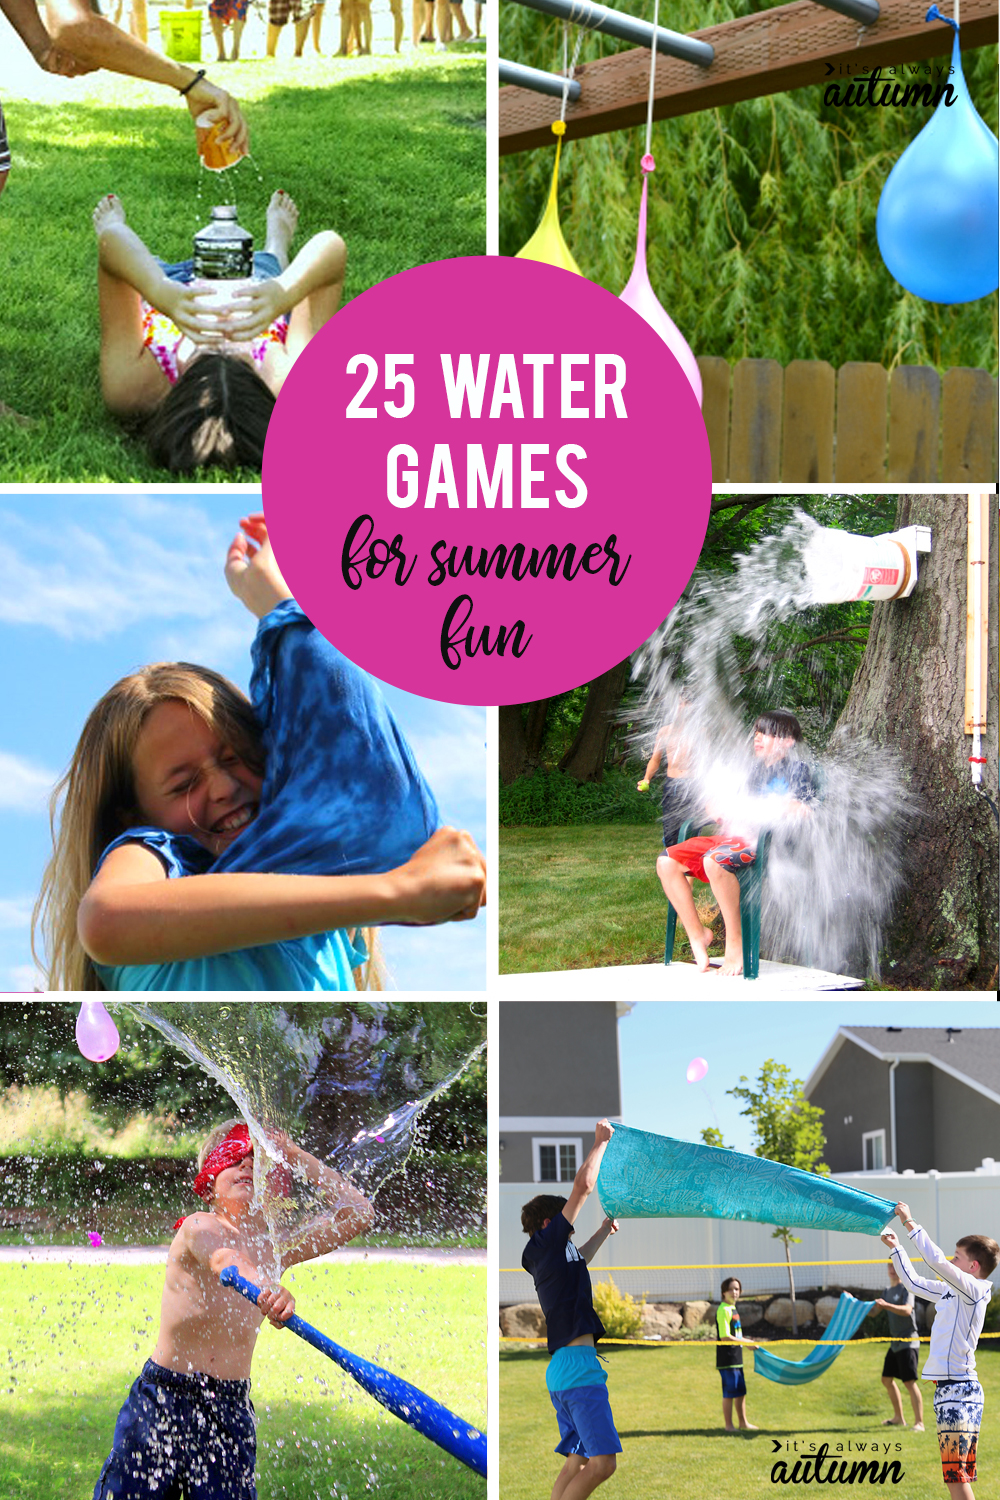 25 water games for tons of fun this summer! Perfect for parties, family reunions, VBS, and more.